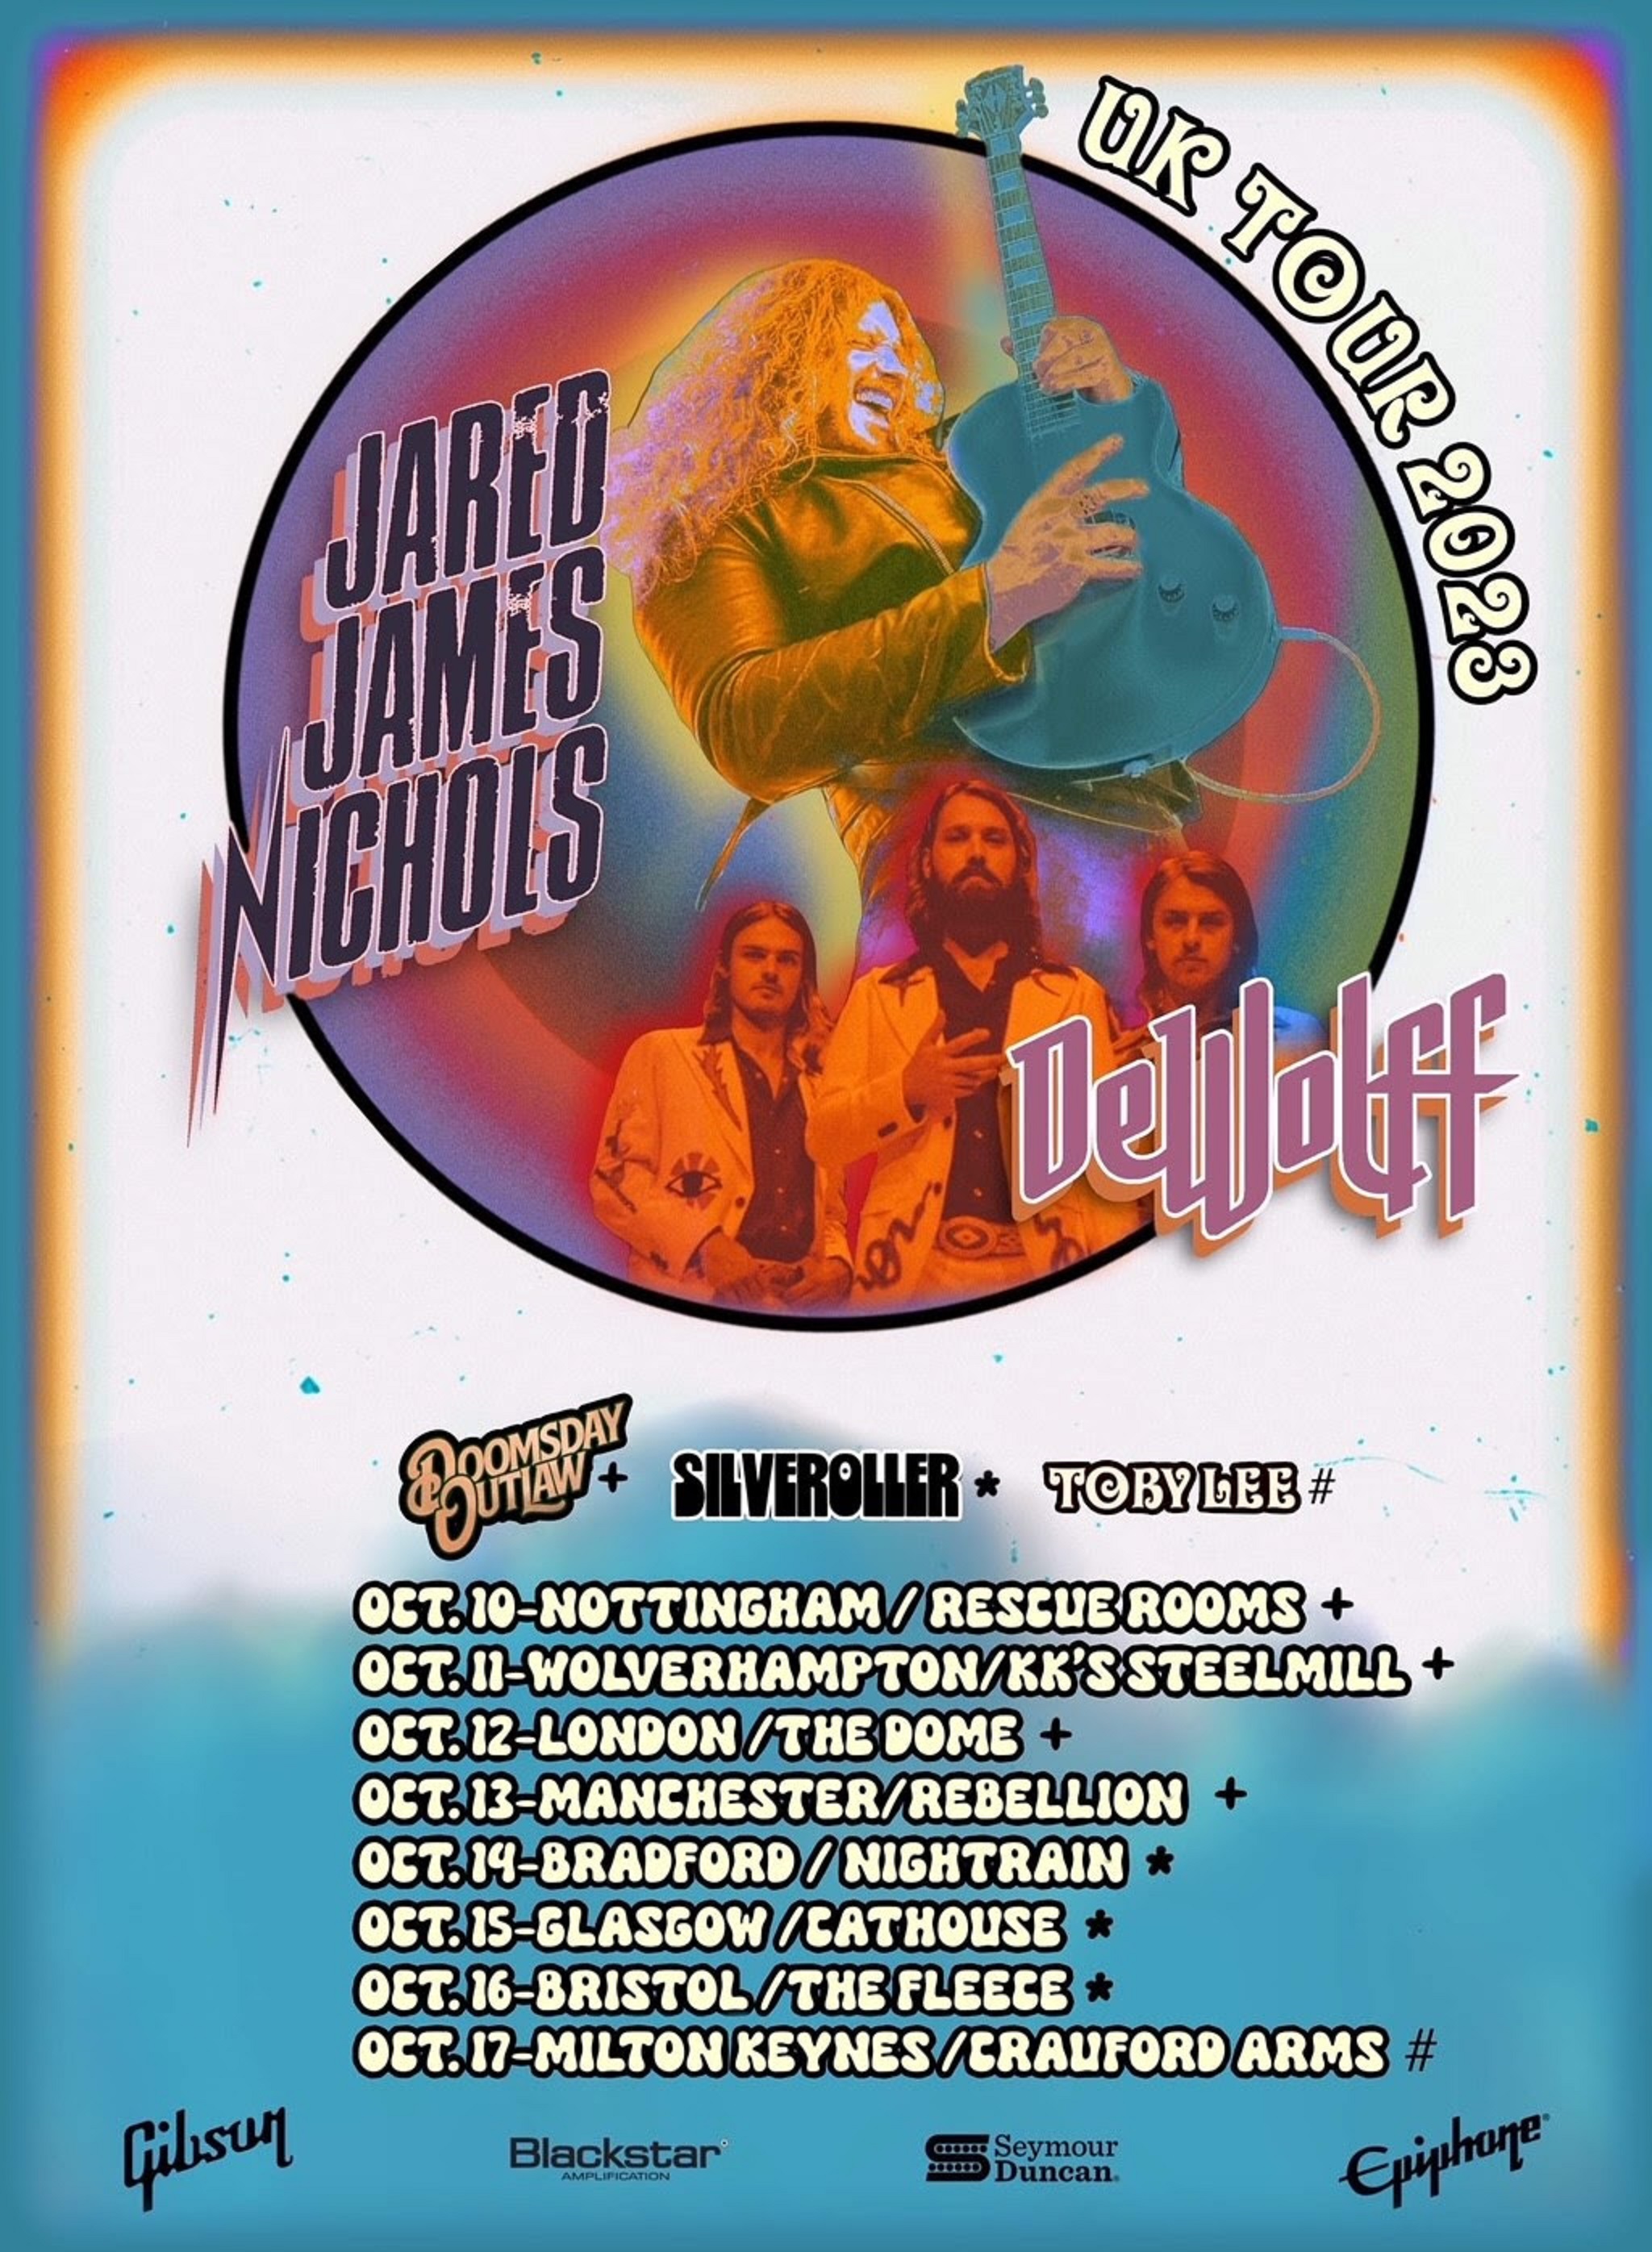 Jared James Nichols announces October 2023 UK Tour with special guests DeWolff